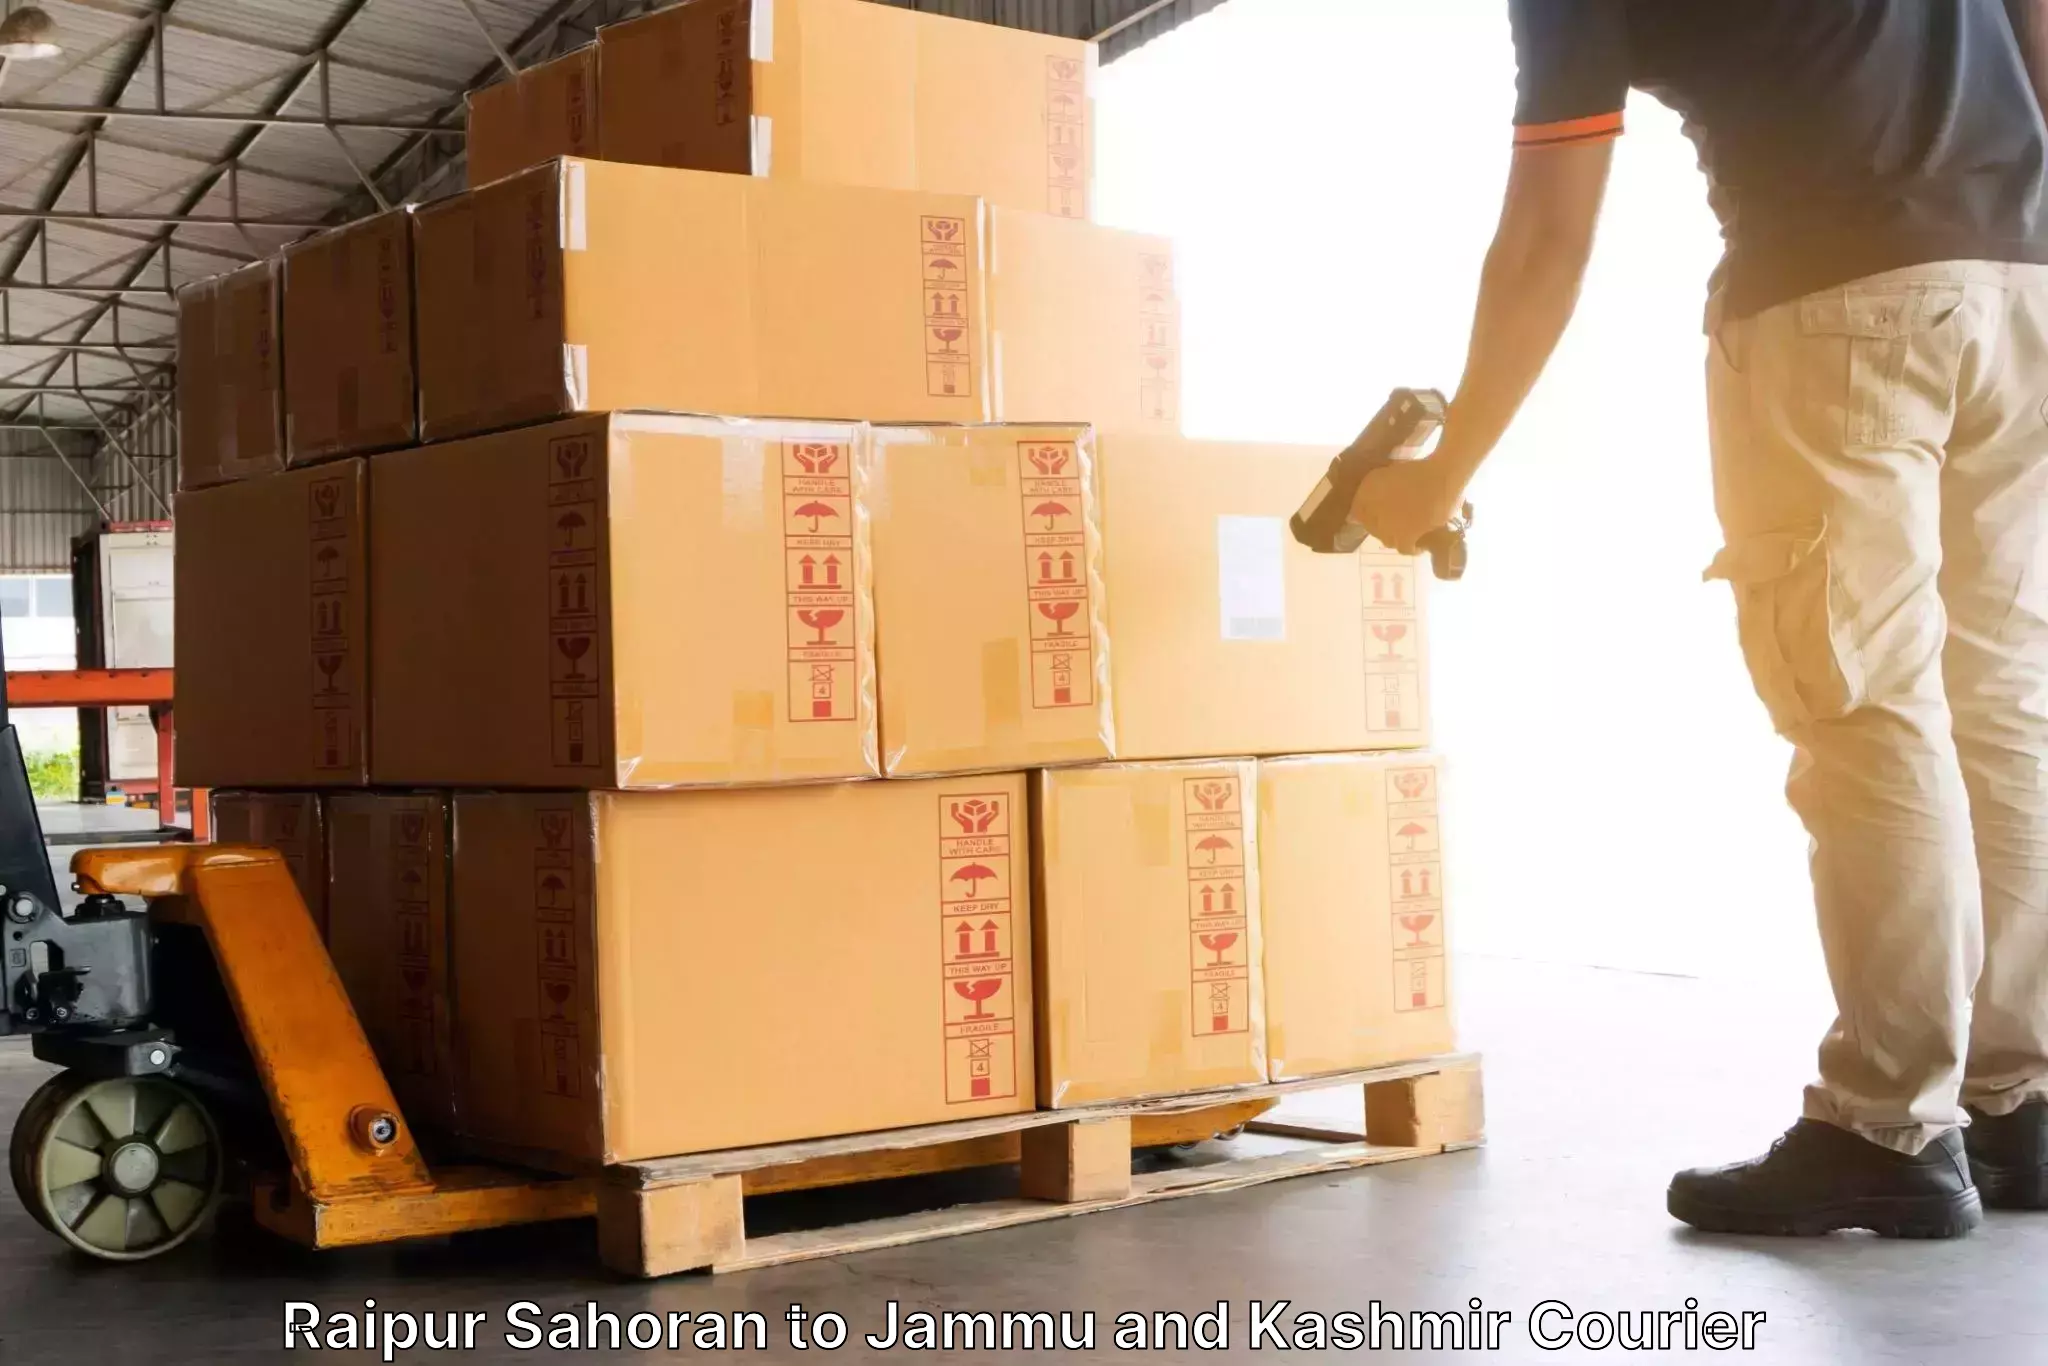 Reliable courier service Raipur Sahoran to Poonch